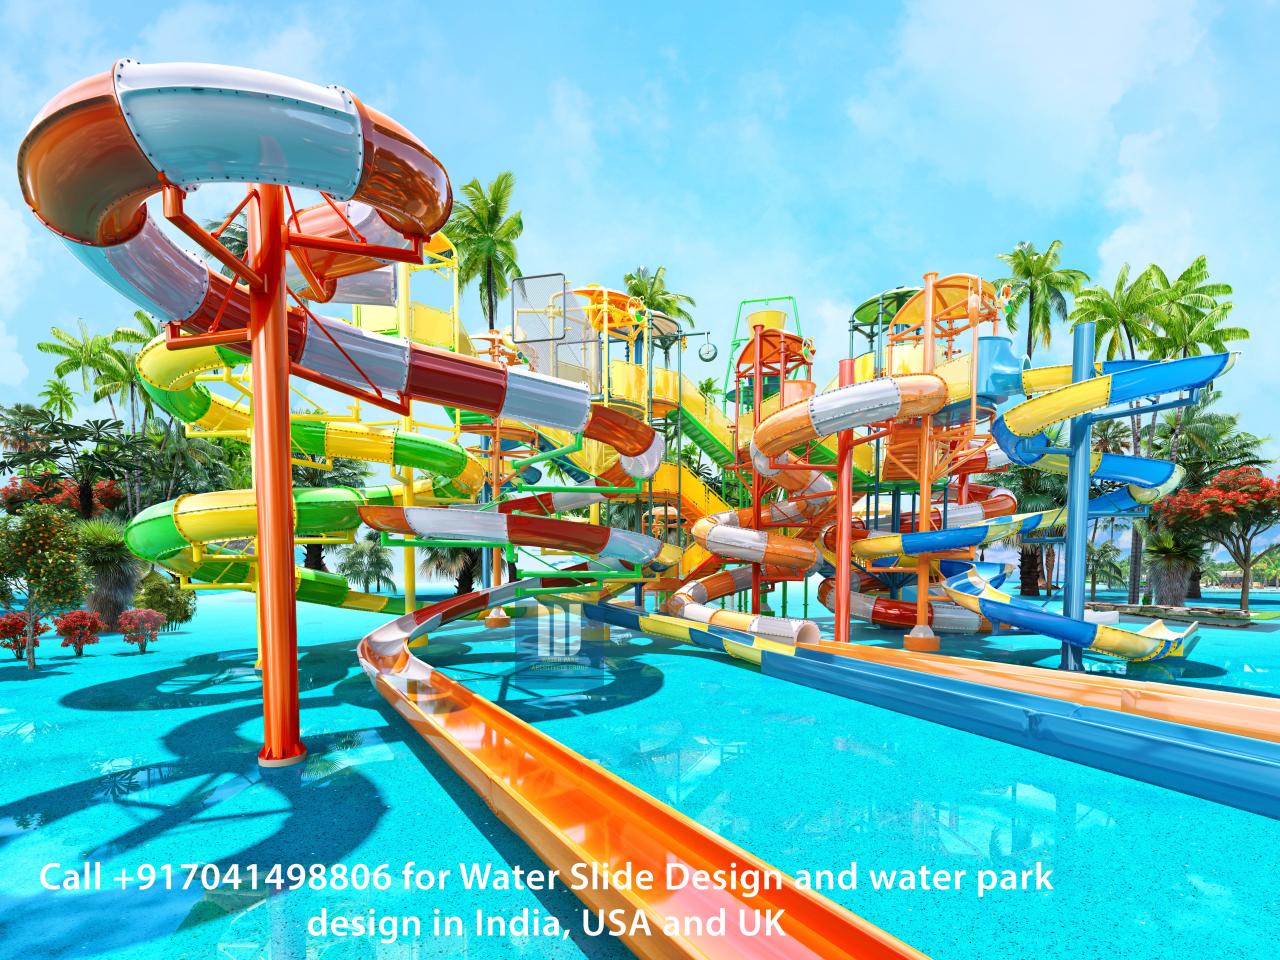 Water Slide Design and Planning